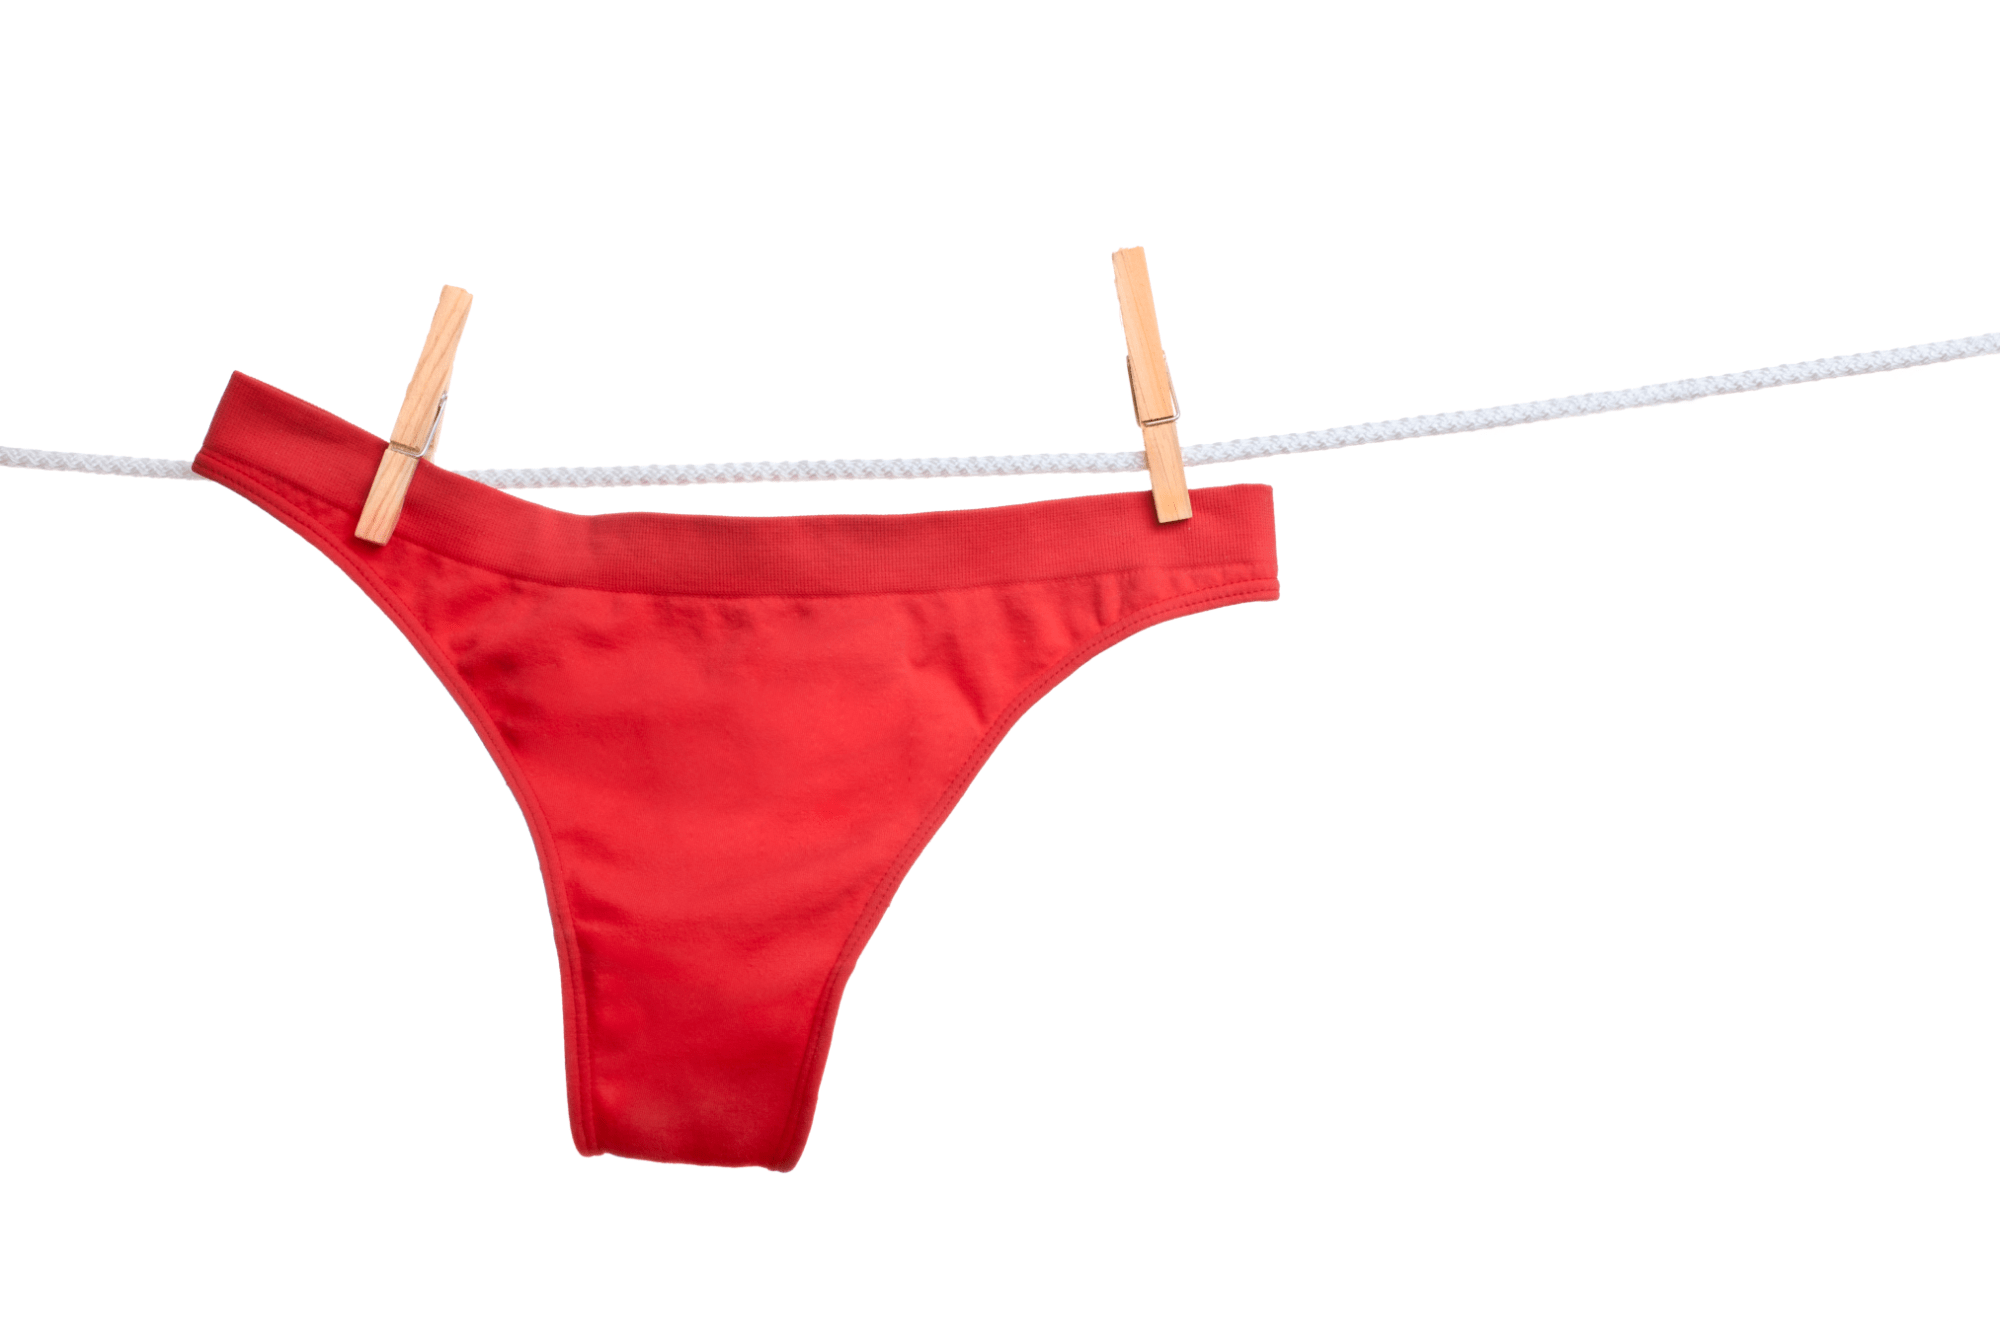 Red panties to attract love? We tell you how to really call your life good luck